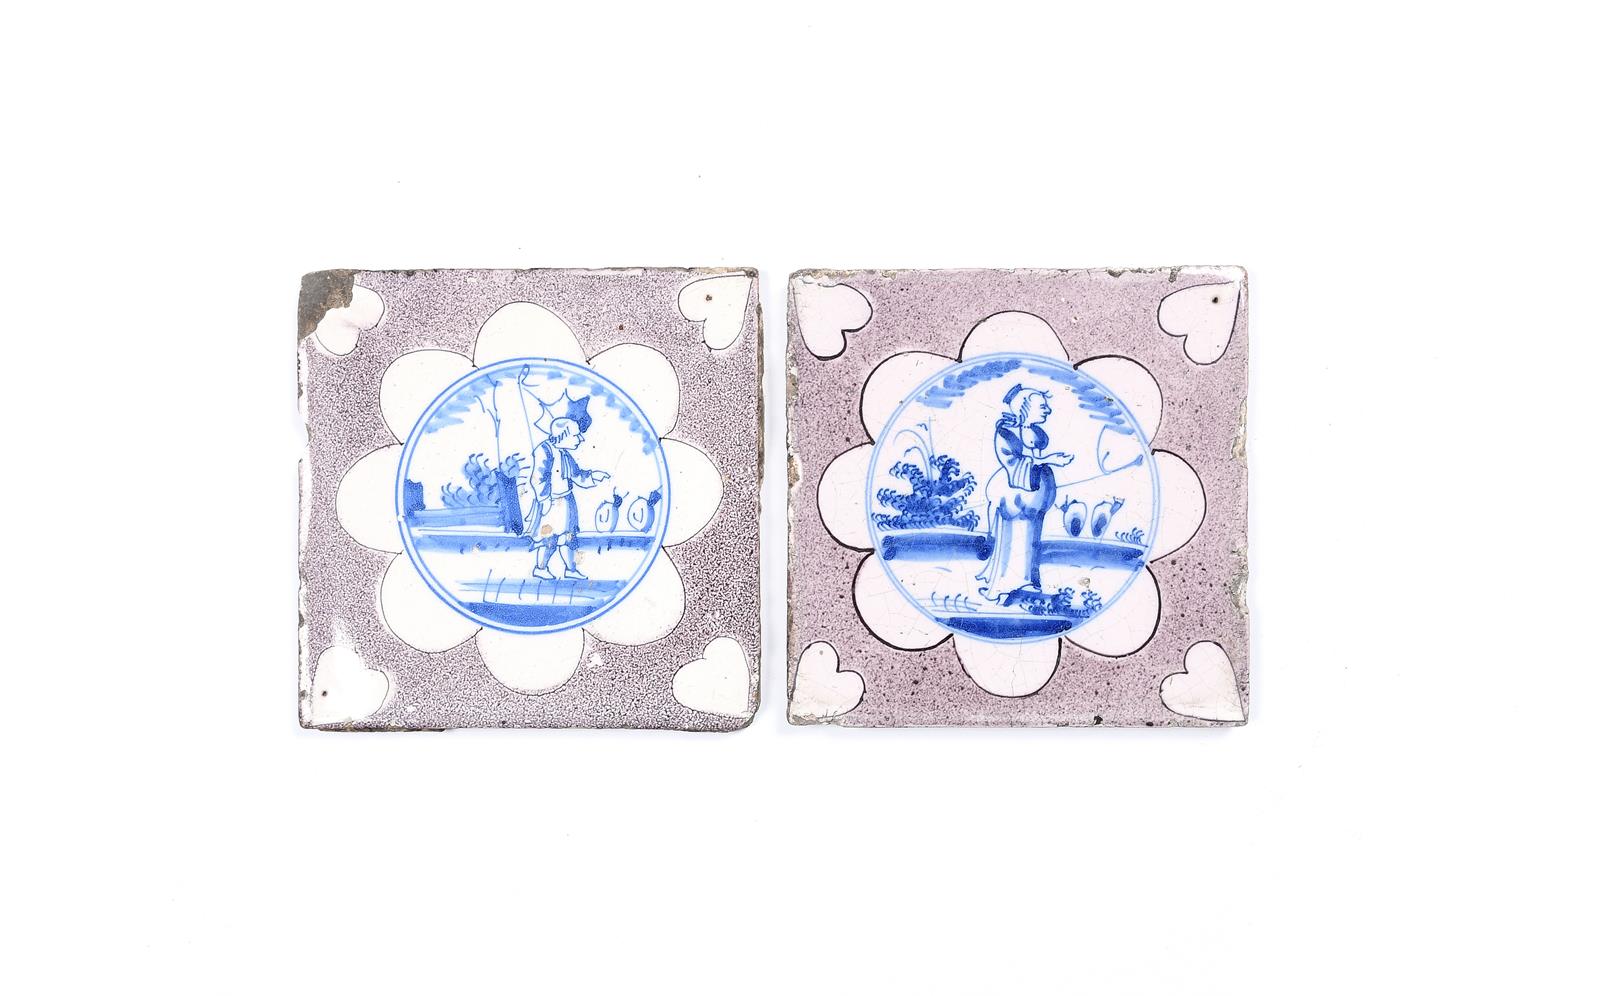 An unusual pair of delftware tiles, c.1700, probably London, painted in a bright blue with a